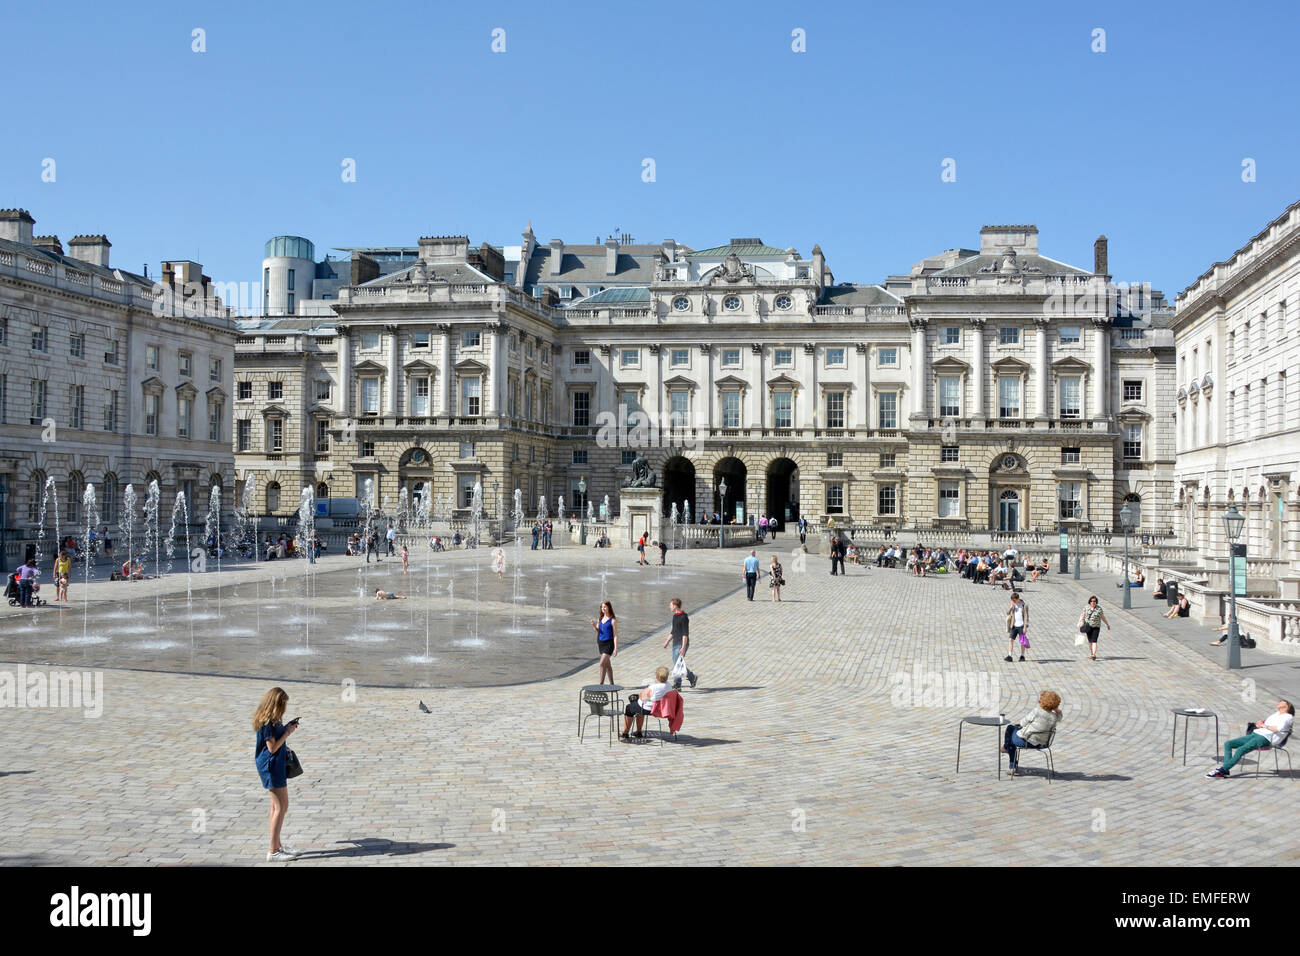 People tourists enjoy fountains & Neoclassical buildings surrounding  cobblestone courtyard spring sunshine at Somerset House Strand London England UK Stock Photo